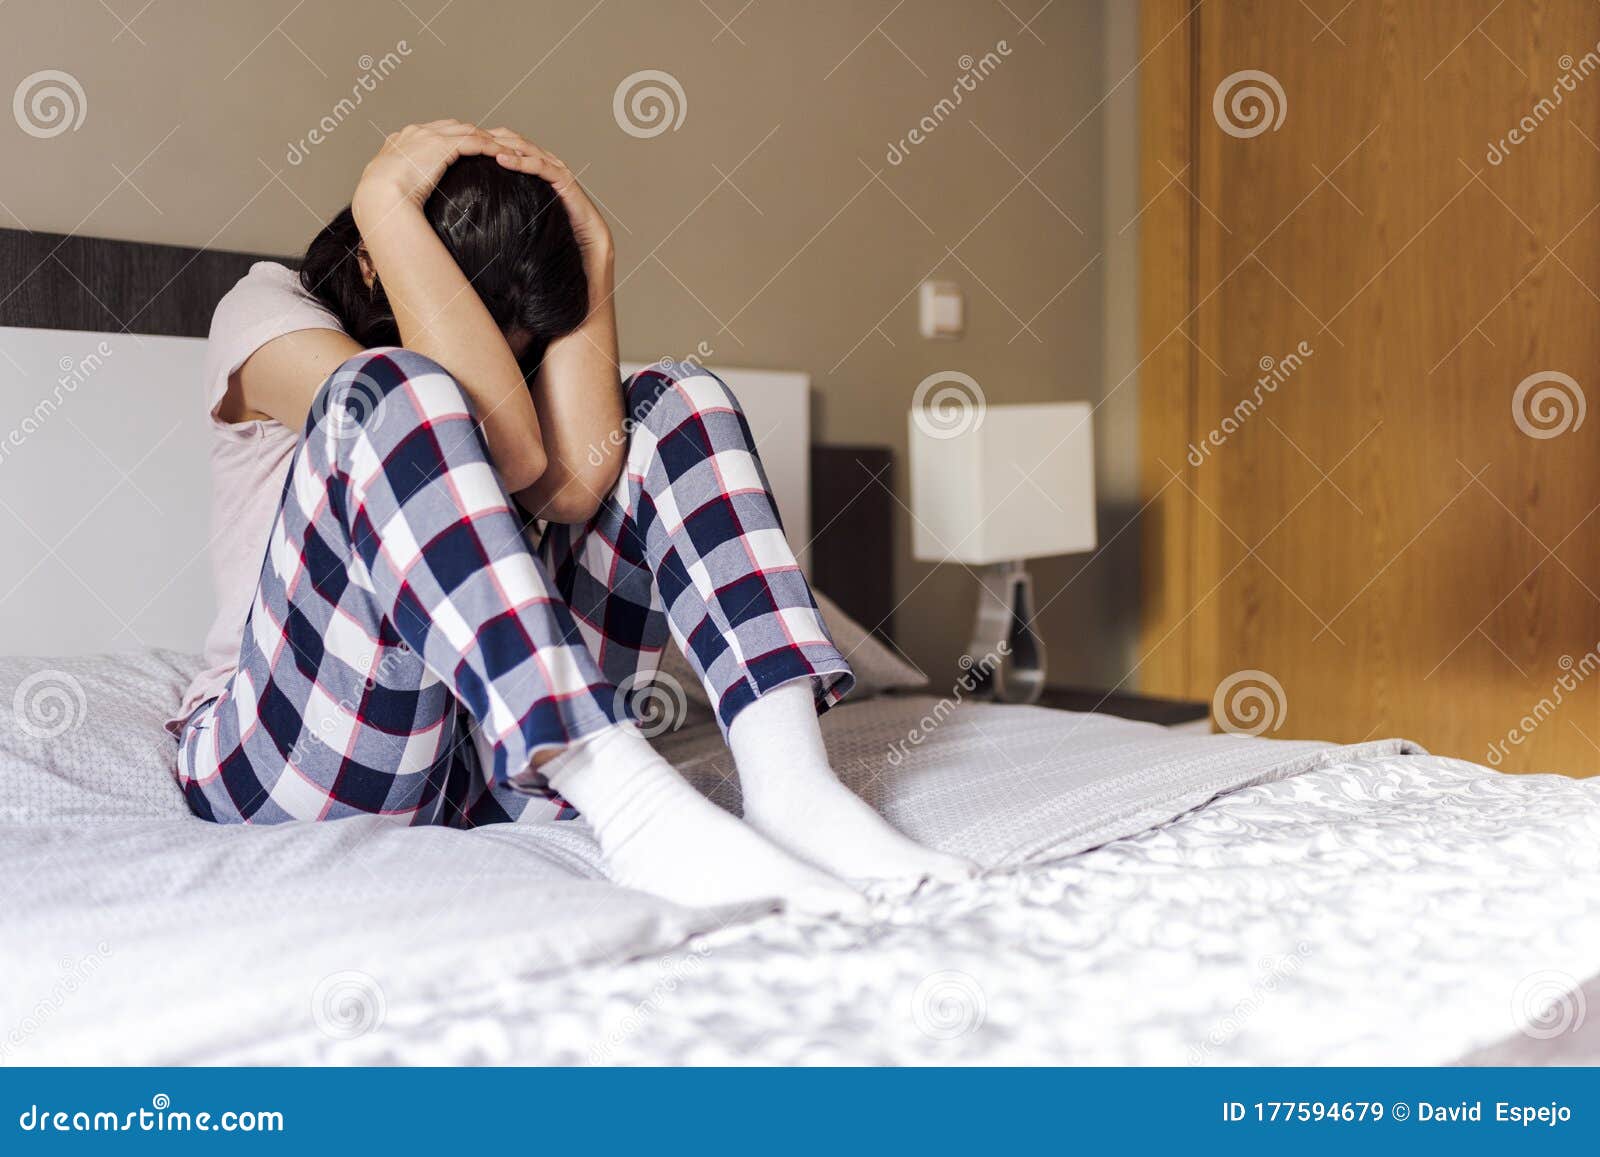 Girl Crying in Her Room Bed Stock Image - Image of mother, alone ...